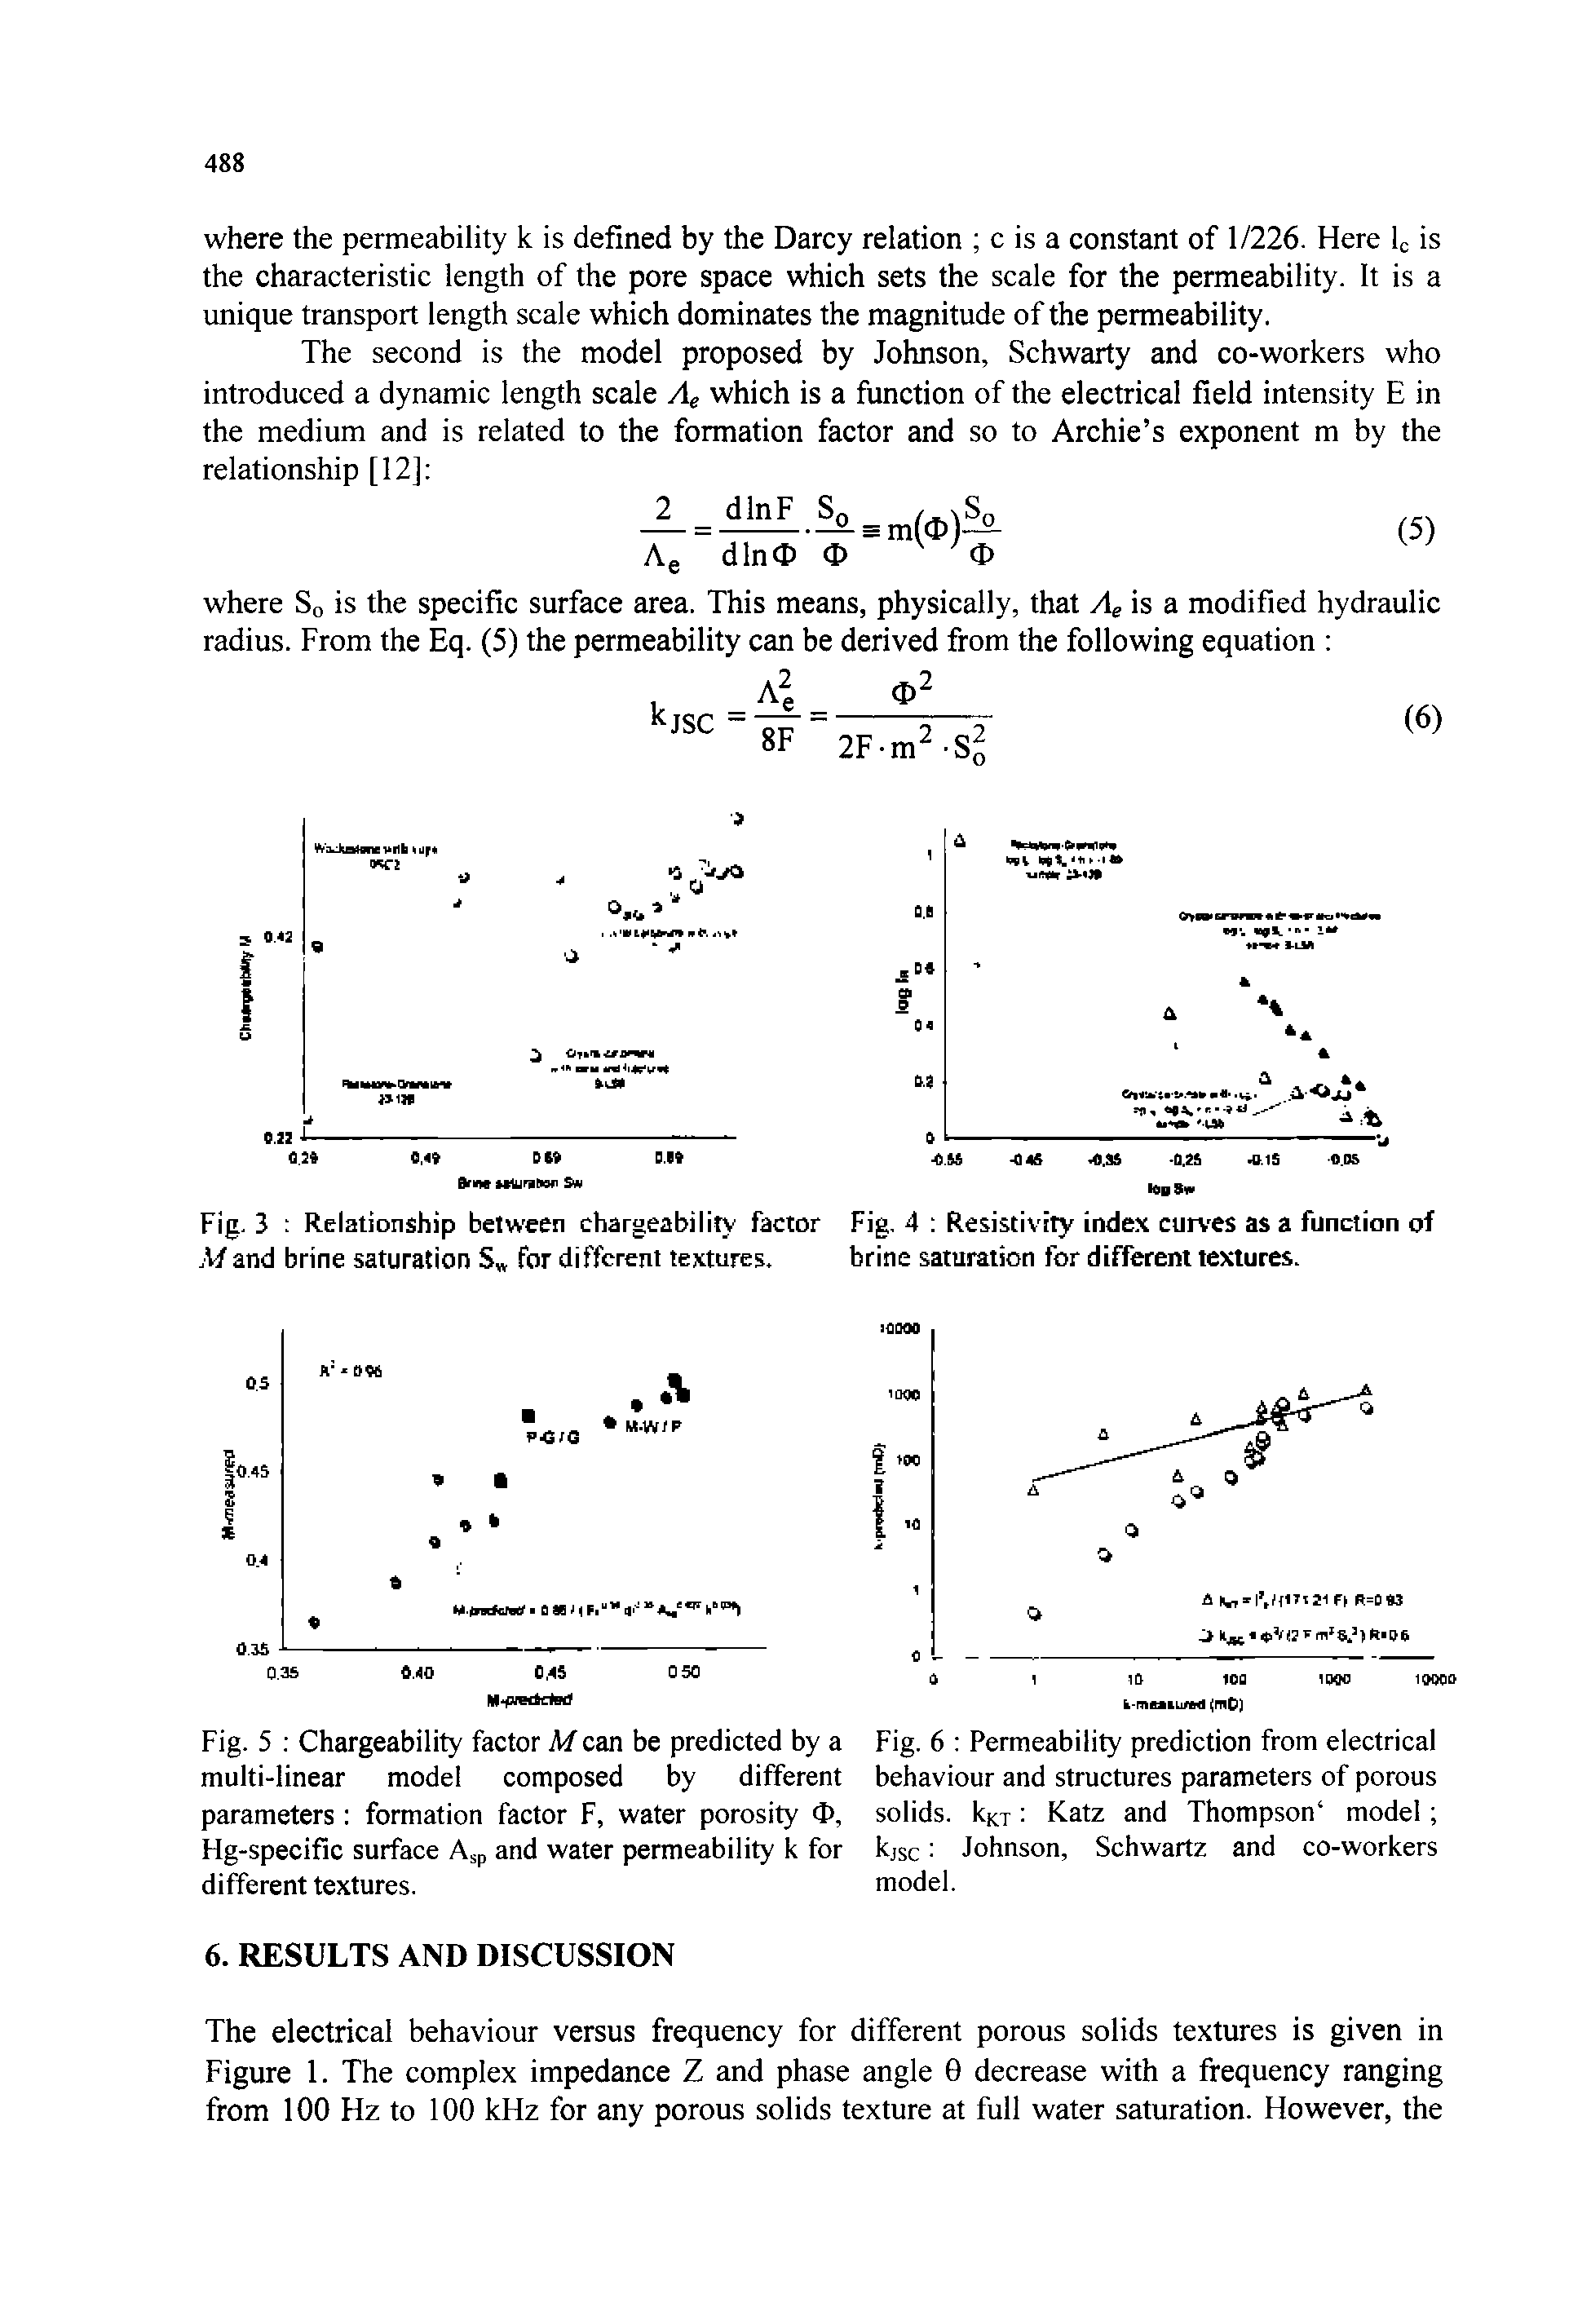 Fig. 5 Chargeability factor A/can be predicted by a Fig. 6 Permeability prediction from electrical multi-linear model composed by different behaviour and structures parameters of porous parameters formation factor F, water porosity O, solids, k Katz and Thompson model Hg-specific surface Asp and water permeability k for kjsc Johnson, Schwartz and co-workers different textures. model.